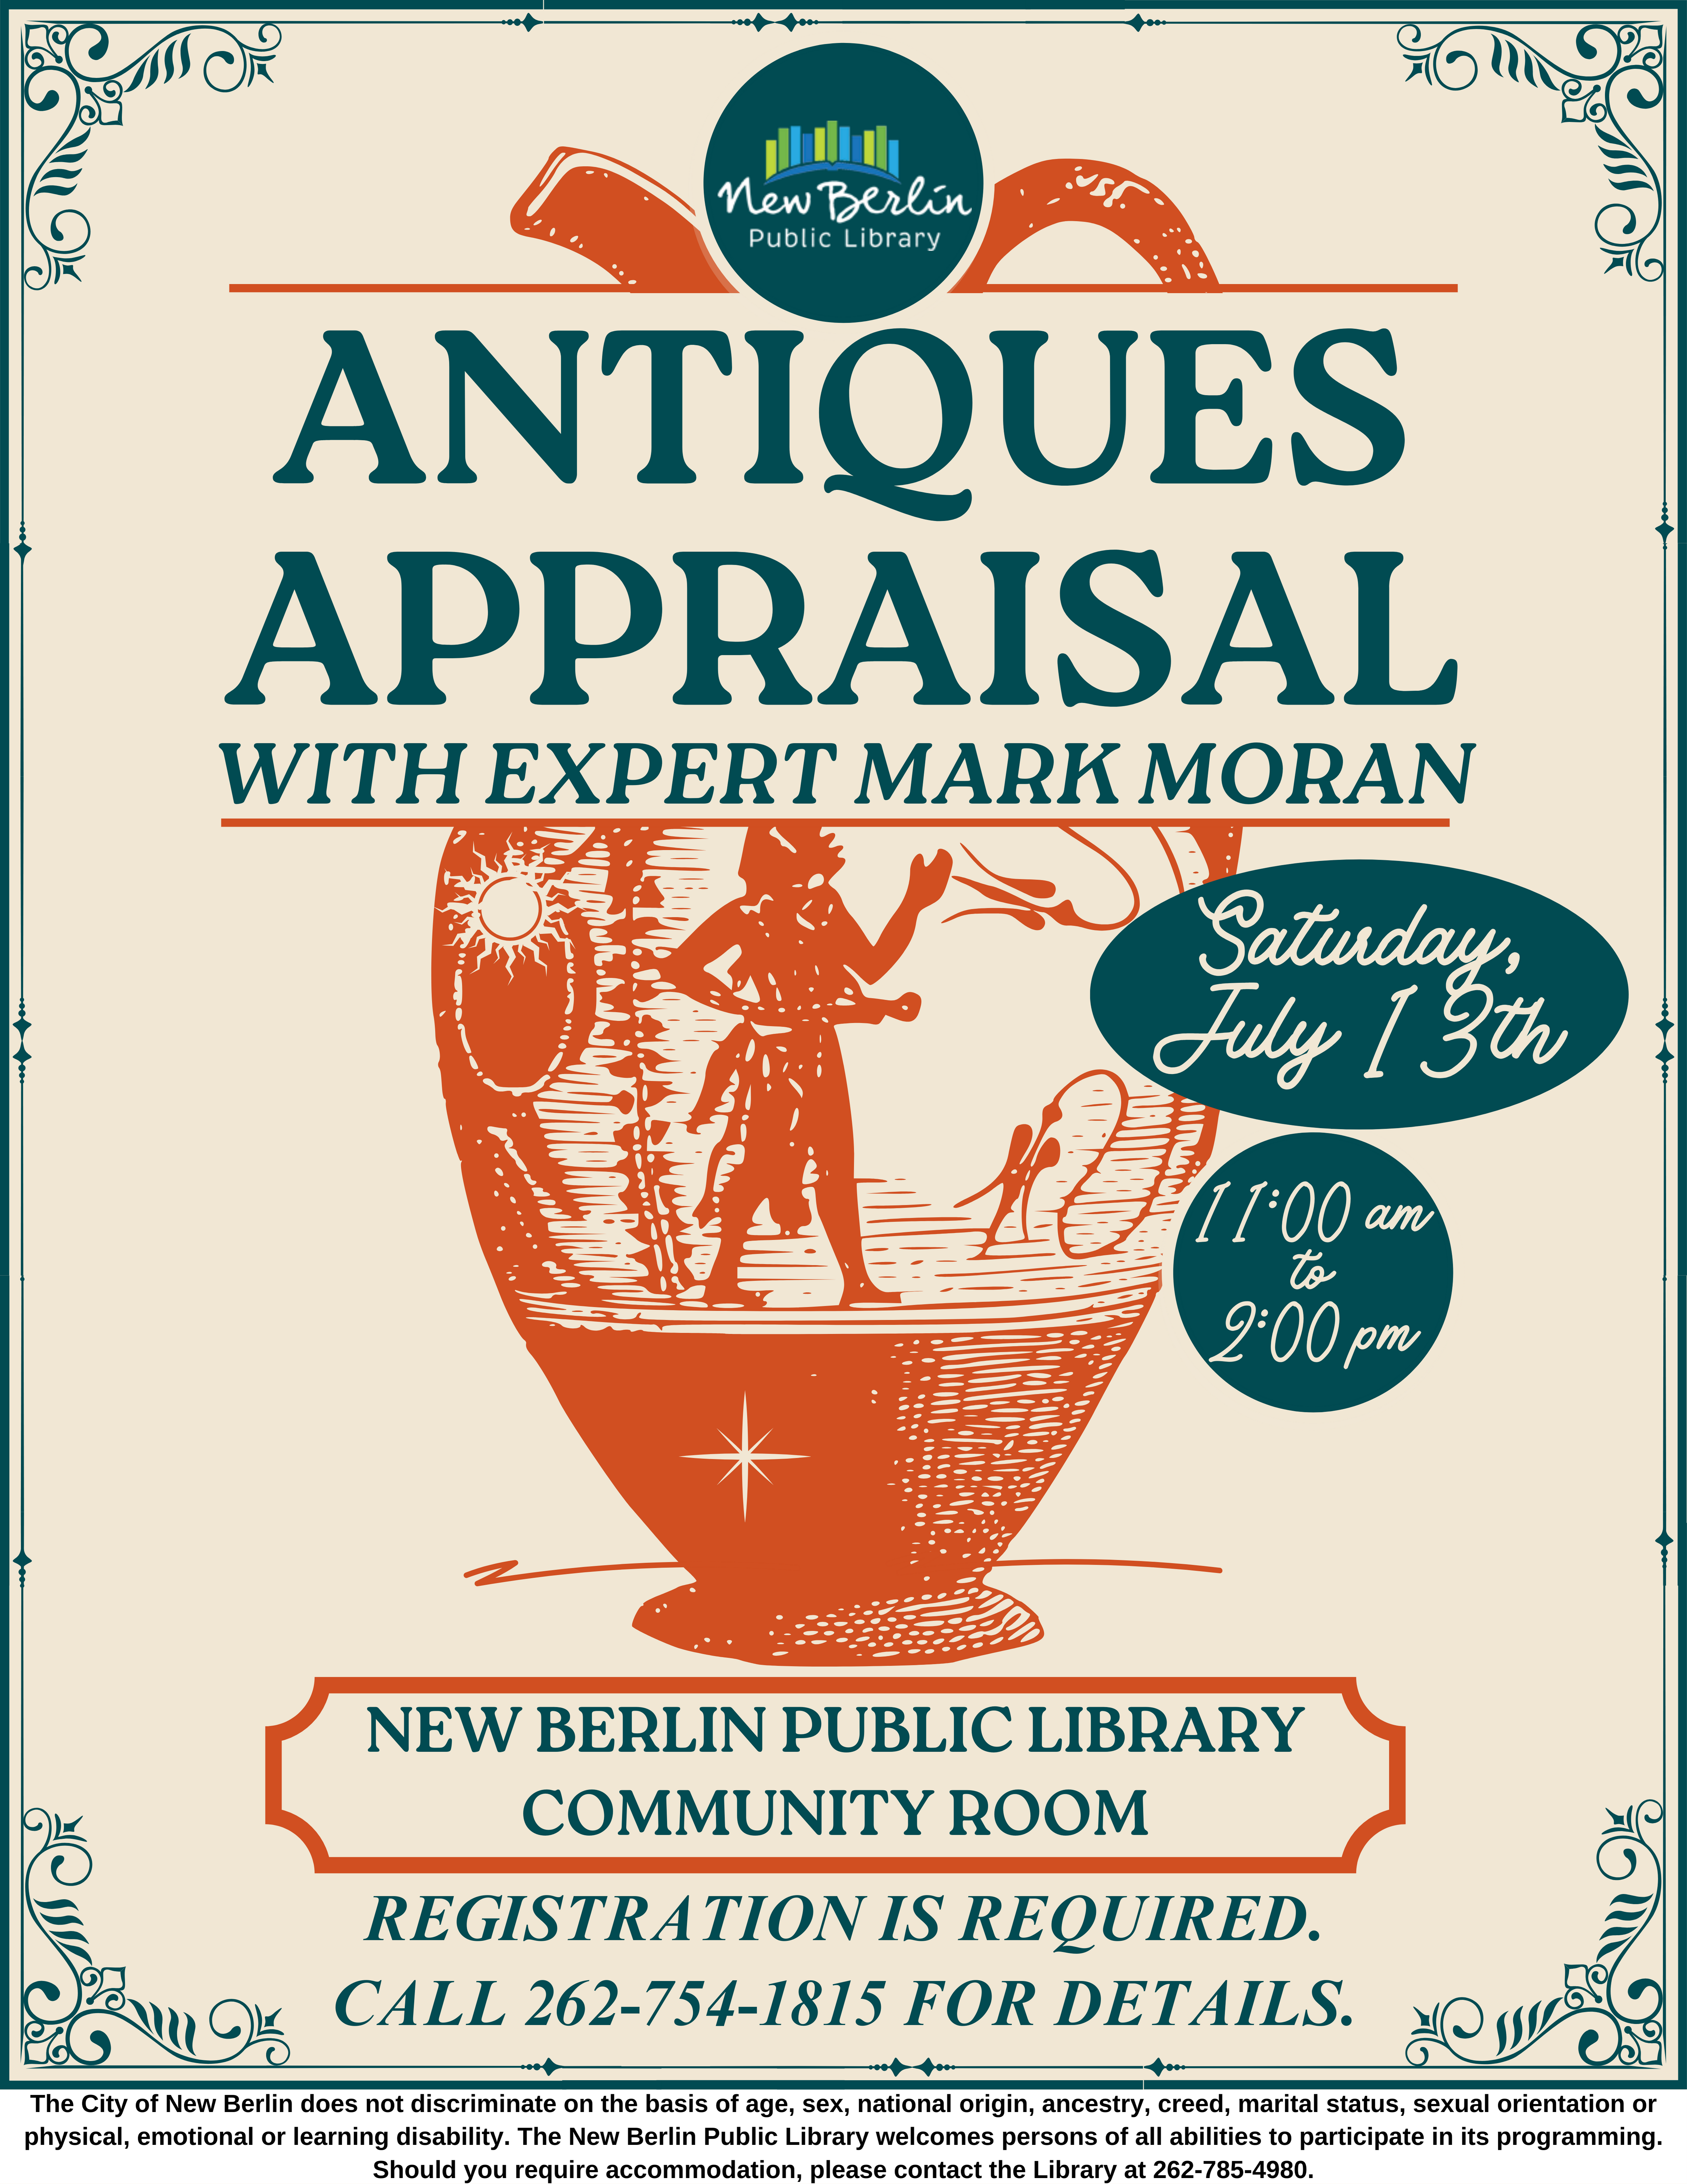 Flyer depicting an antique vase advertising the "Antiques Appraisal Event" with expert Mark Moran, using ancient imagery and motifs.